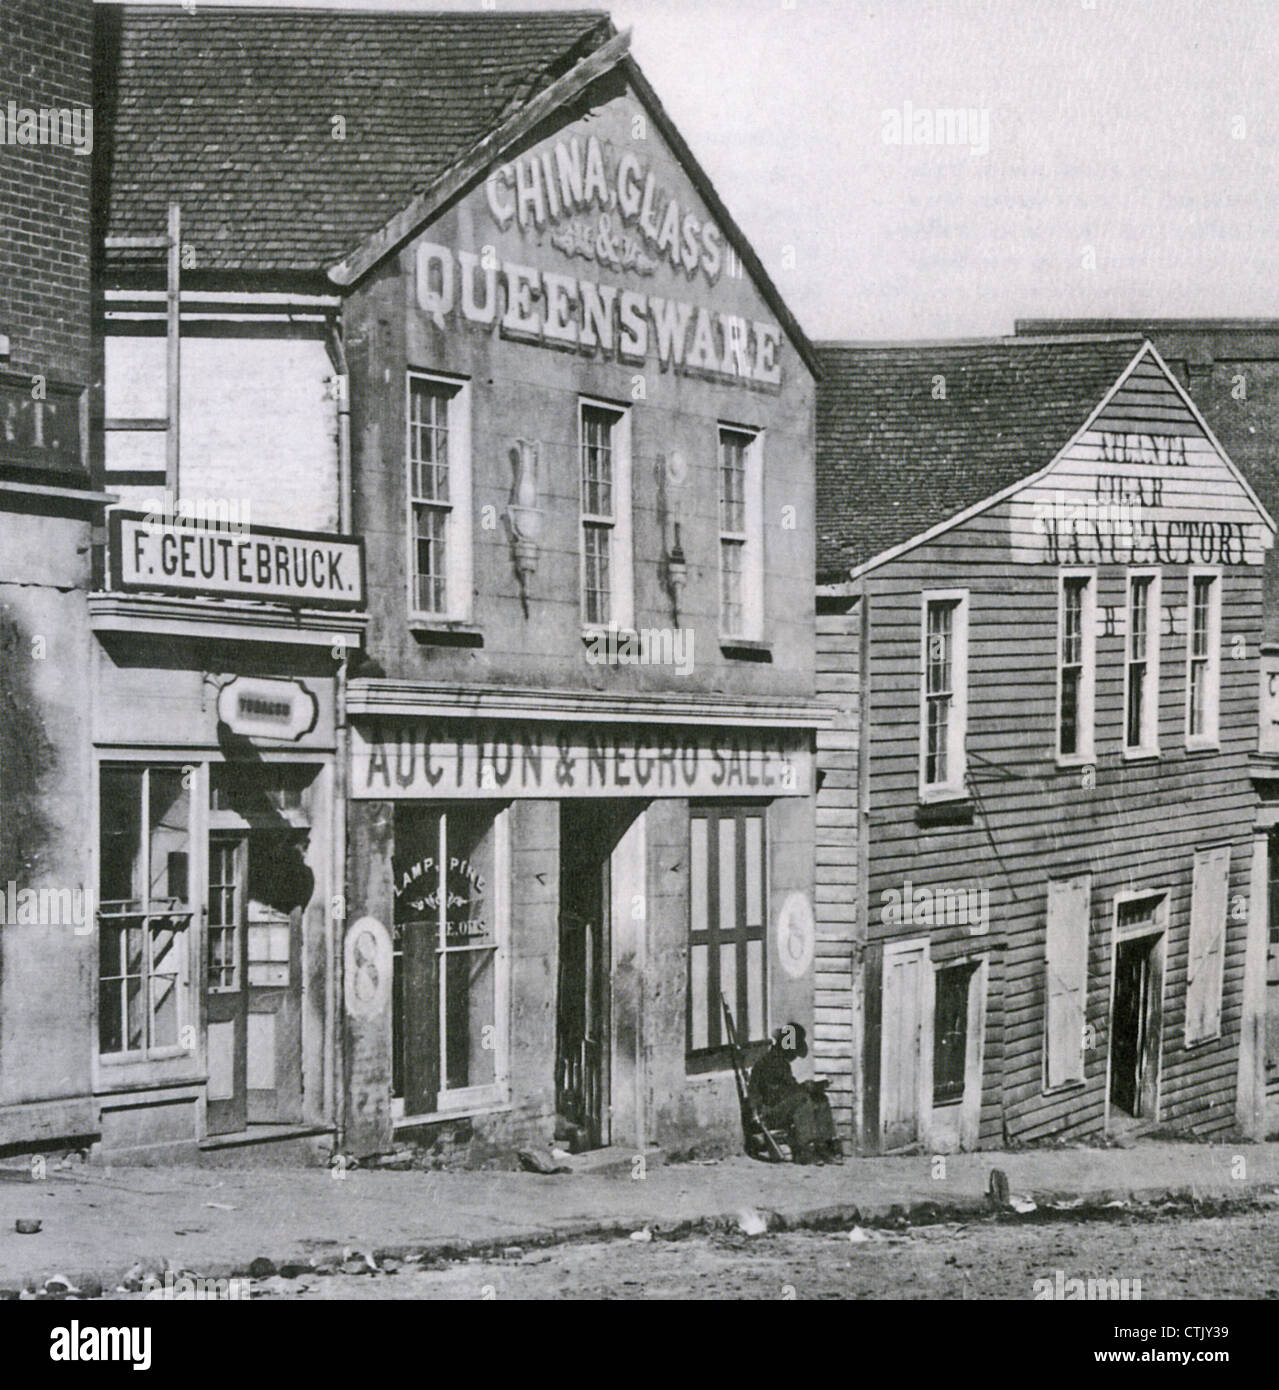 SLAVE AUCTION HOUSE in Atlanta, Georgia about 1864 between a tobacco shop and a cigar factory on Whitehall Street (today called Peachtree Street) Note the guard's rifle. Photo by George Barnard (1819-1902) most famous for his Civil War photos. Stock Photo